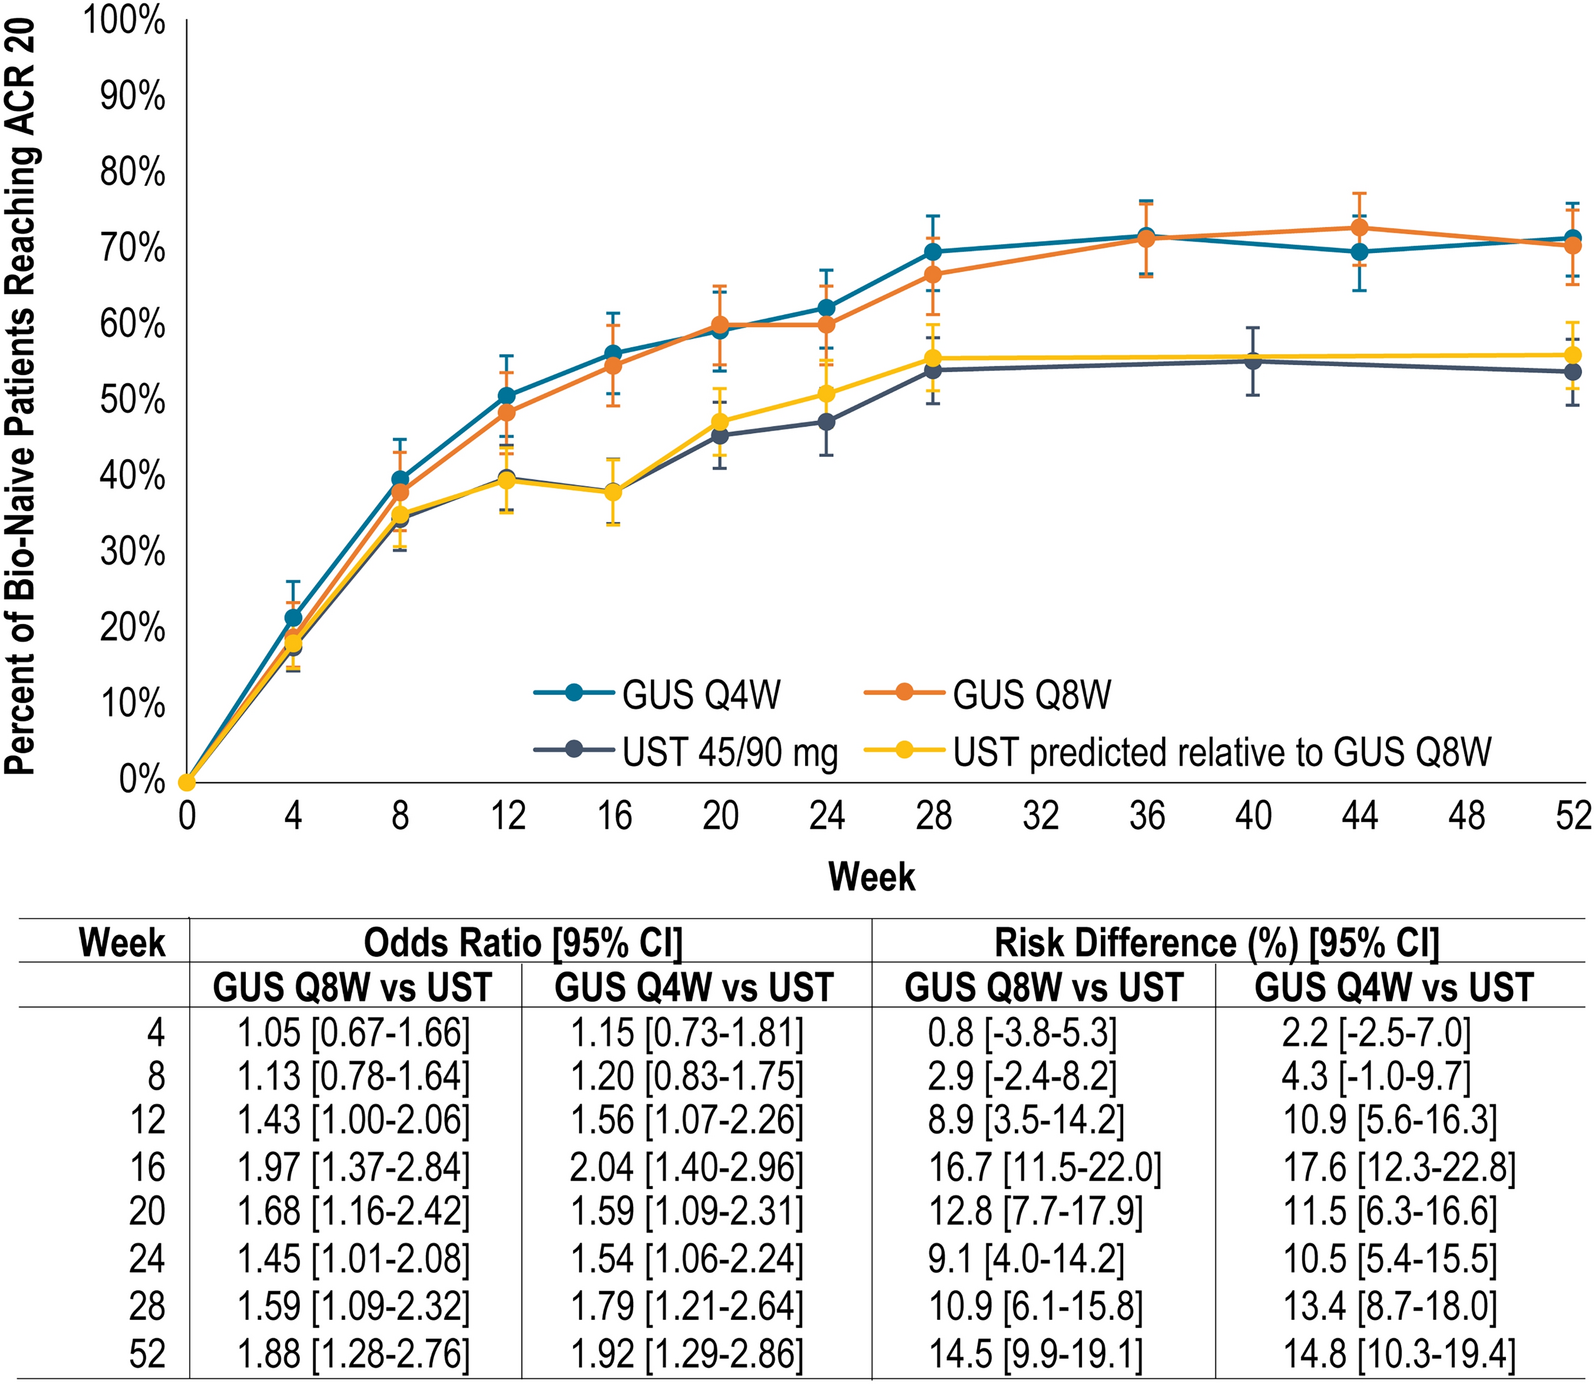 Comparing Efficacy of Guselkumab versus Ustekinumab in Patients with Psoriatic Arthritis: An Adjusted Comparison Using Individual Patient Data from the DISCOVER and PSUMMIT Trials